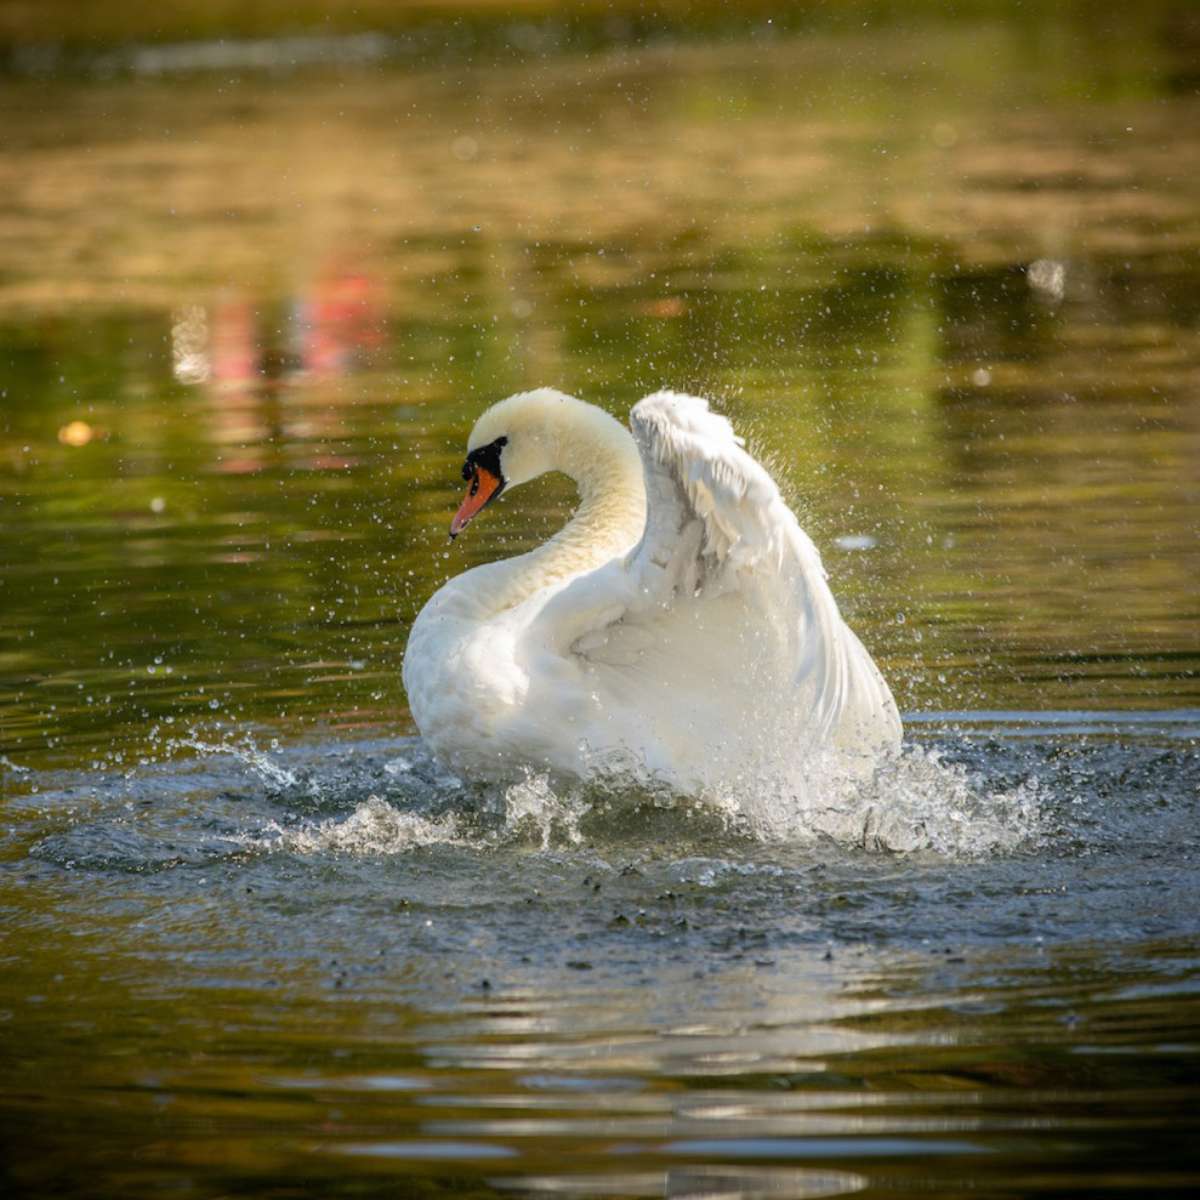 Swan shaking off the water at Lake LaVerne.